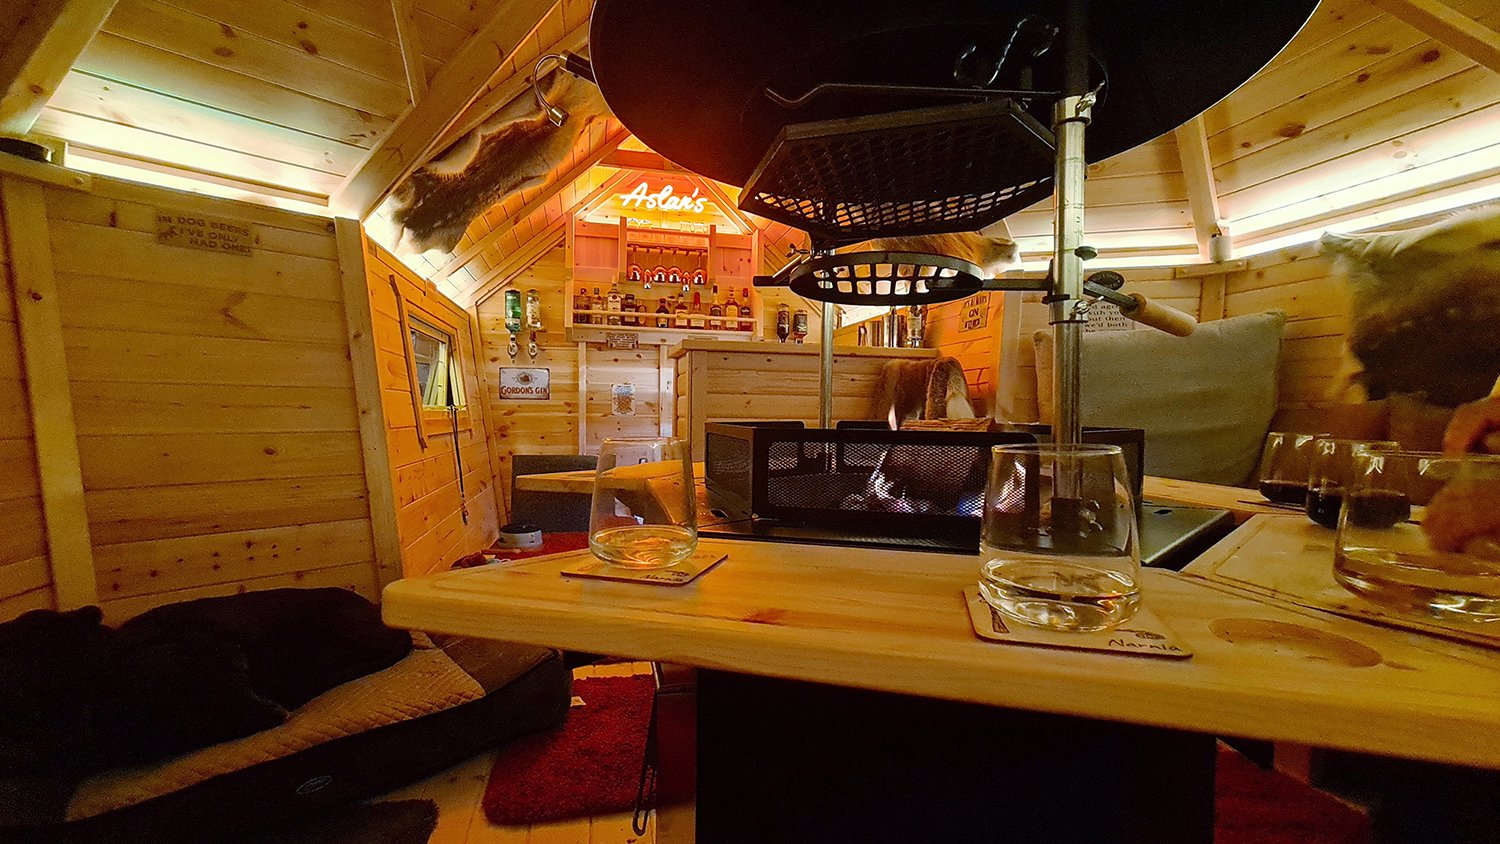 Inside Arctic Cabins Man Cave Garden Bar with BBQ unit and neon sign decoration